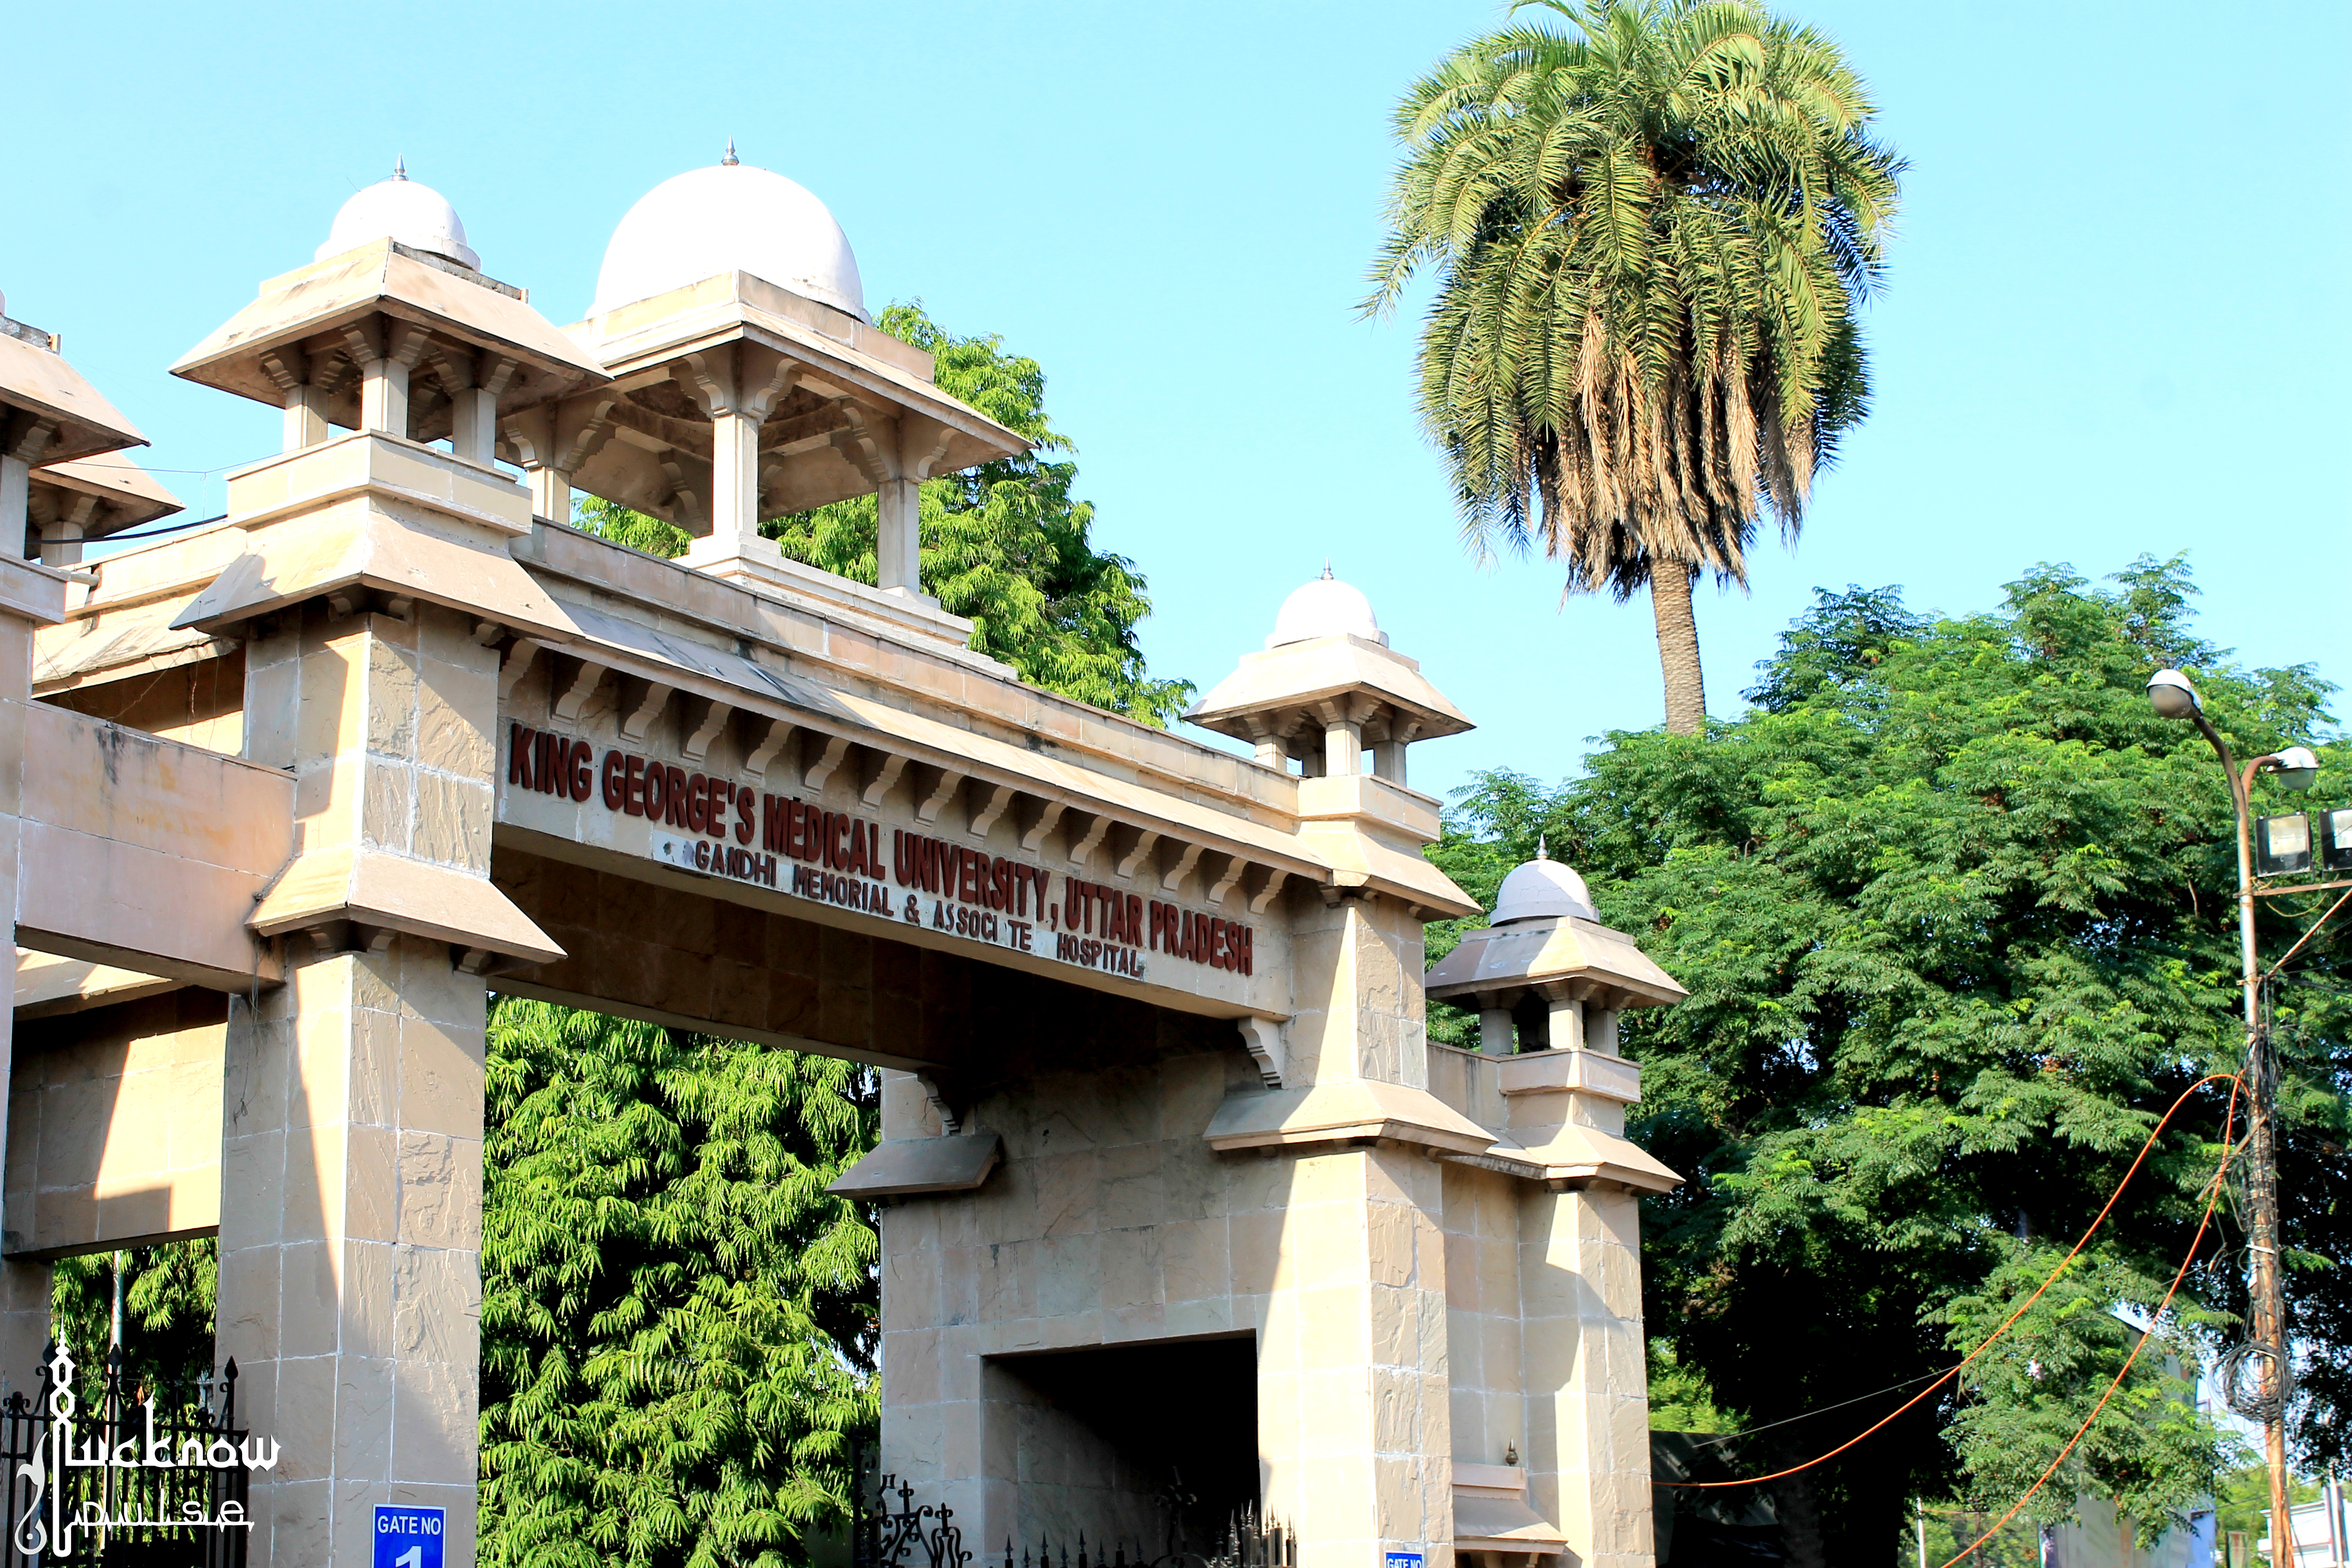 Picture of the main entrance to King George's Medical Universitycampus.